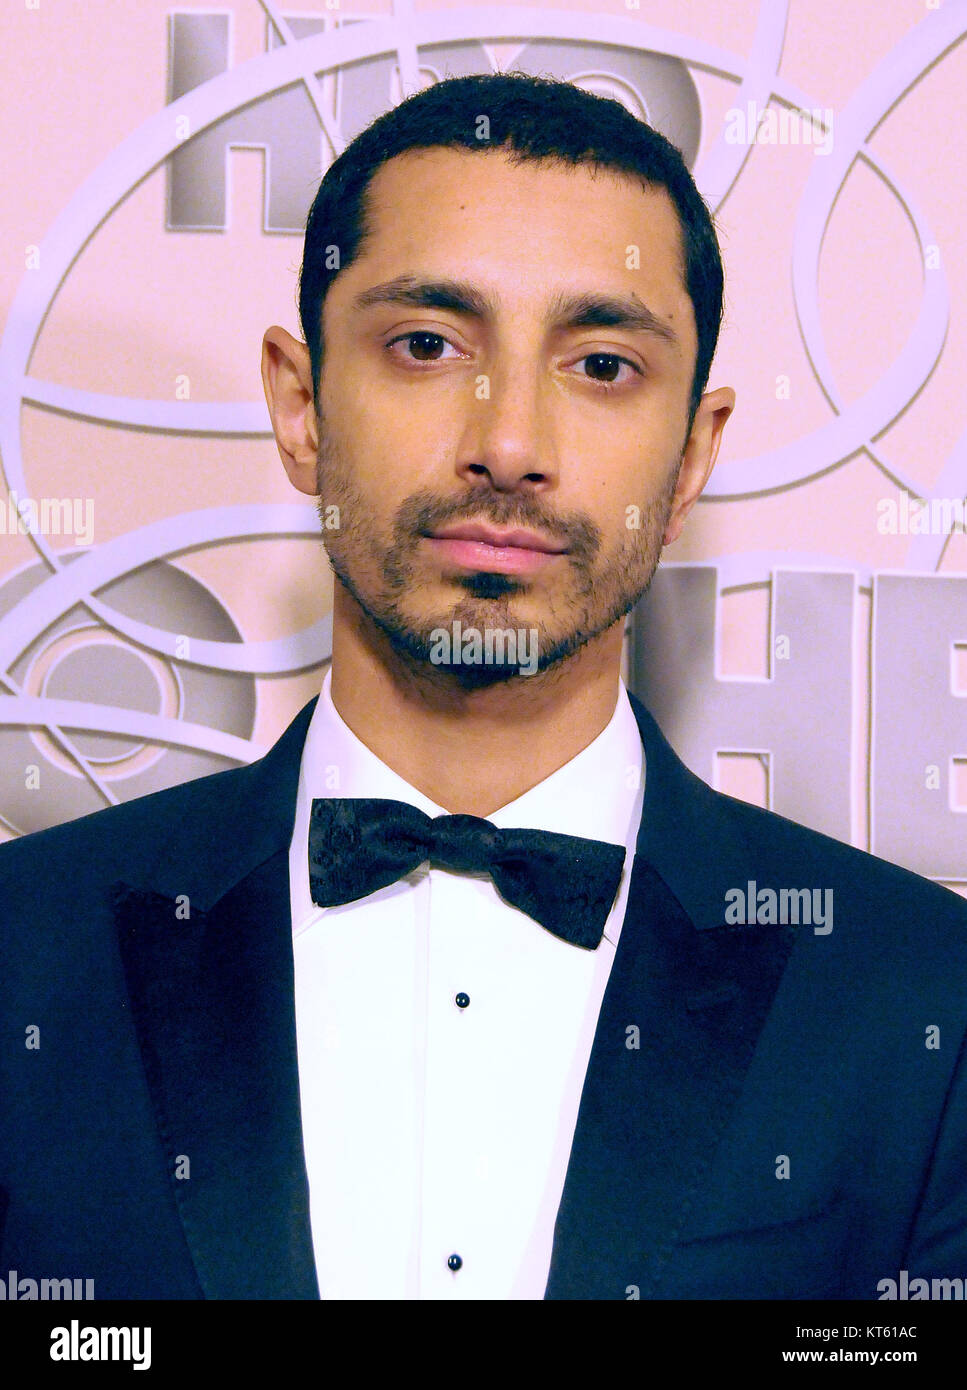 BEVERLY HILLS, CA  - JANUARY 08: Actor Riz Ahmed attends HBO's Official Golden Globe Awards After Party at Circa 55 Restaurant in The Beverly Hilton Hotel on January 8, 2017 in Beverly Hills, California. Photo by Barry King/Alamy Stock Photo Stock Photo